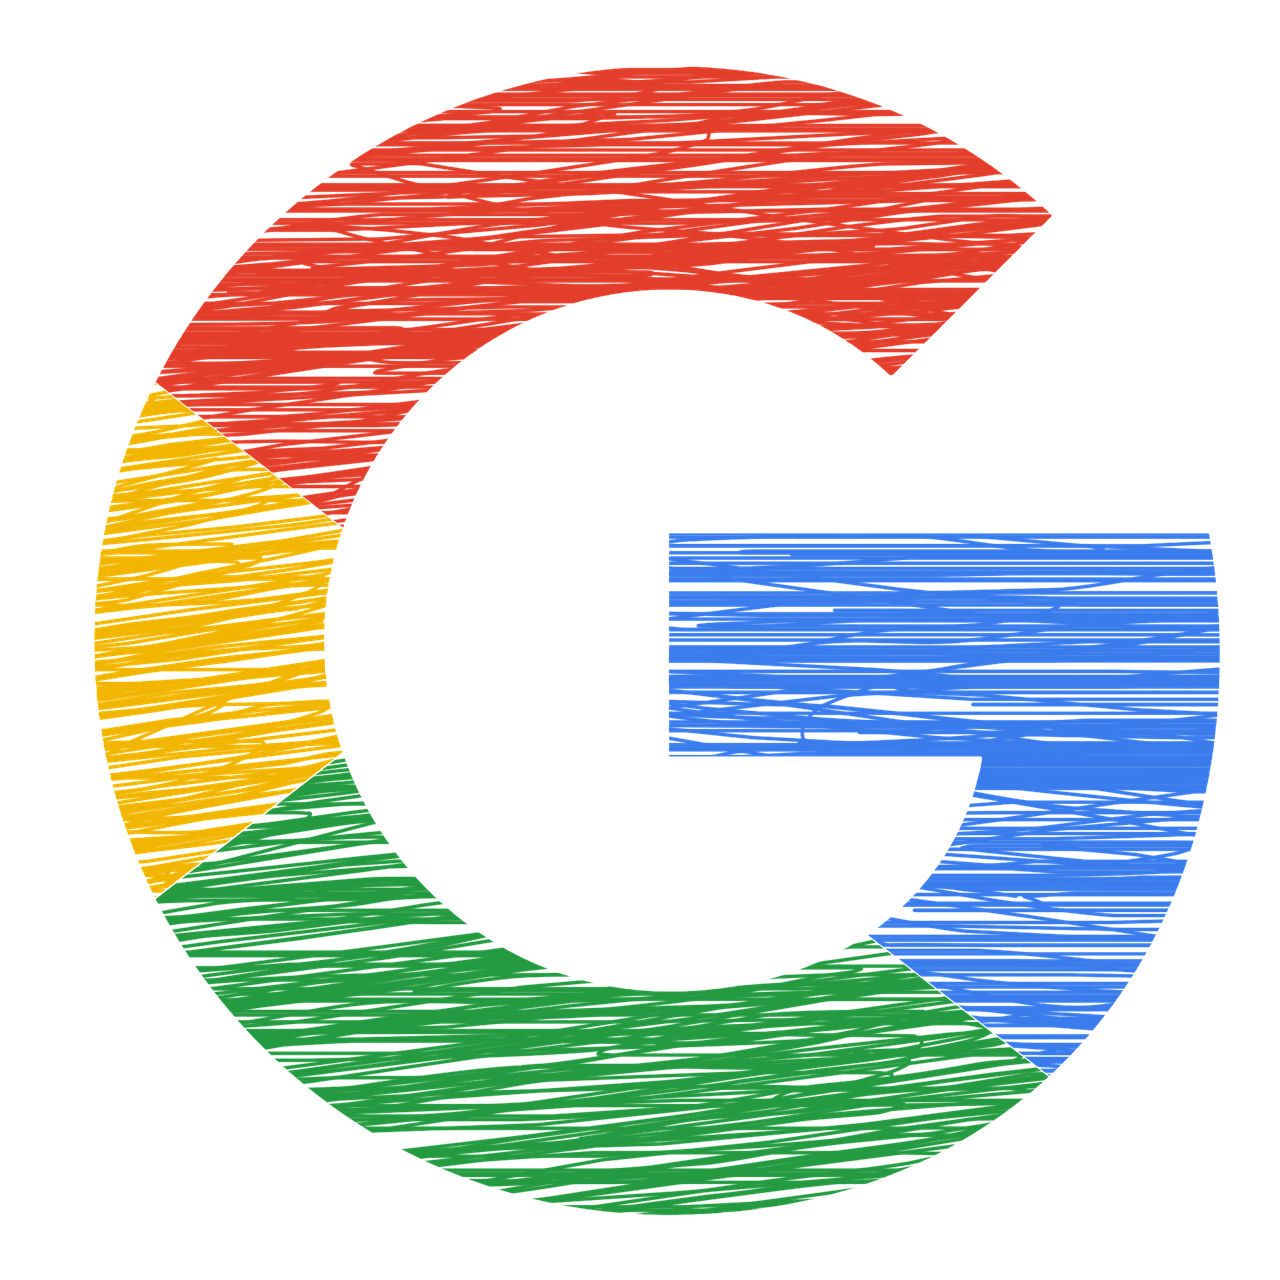 Different Types of Google Logo - Google Chrome to automatically block irritating ads soon